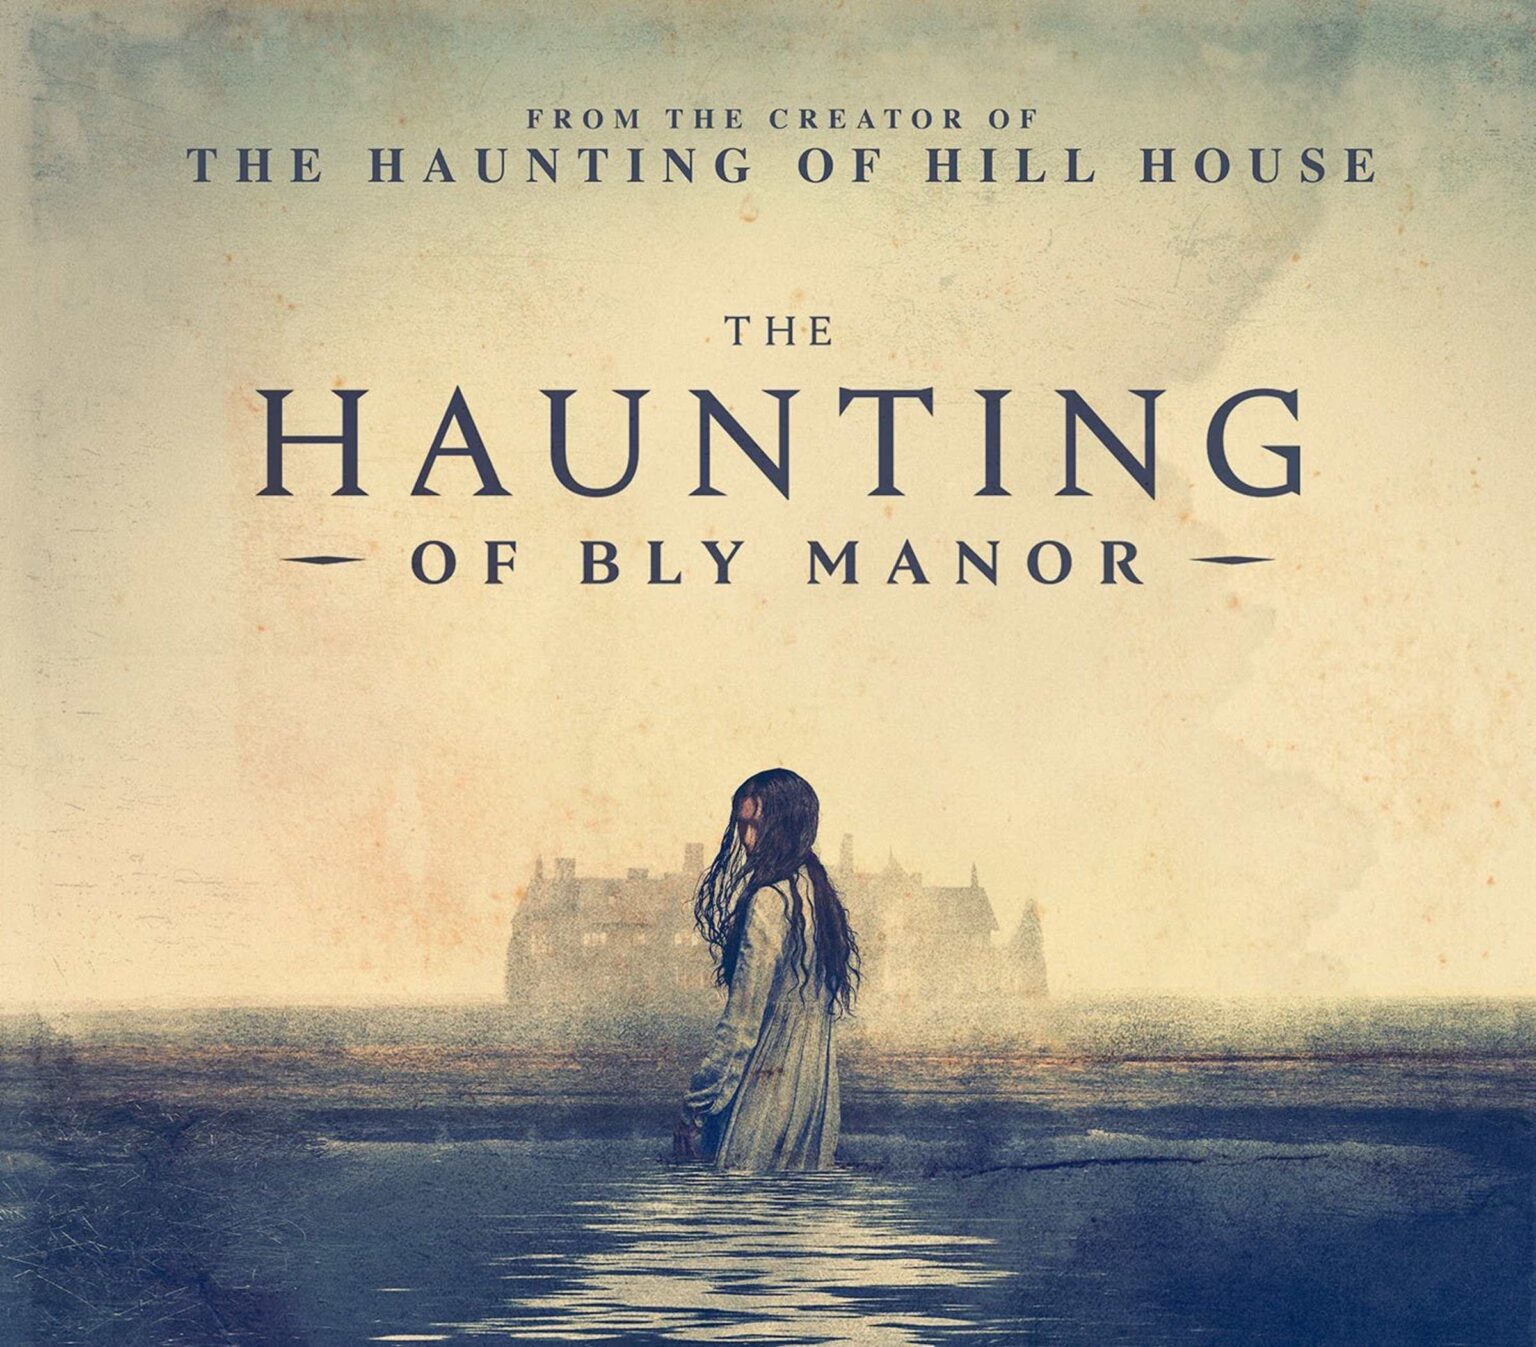 If you just binged 'The Haunting of Bly Manor' on Netflix, you probably have some burning questions. Here are the answers.